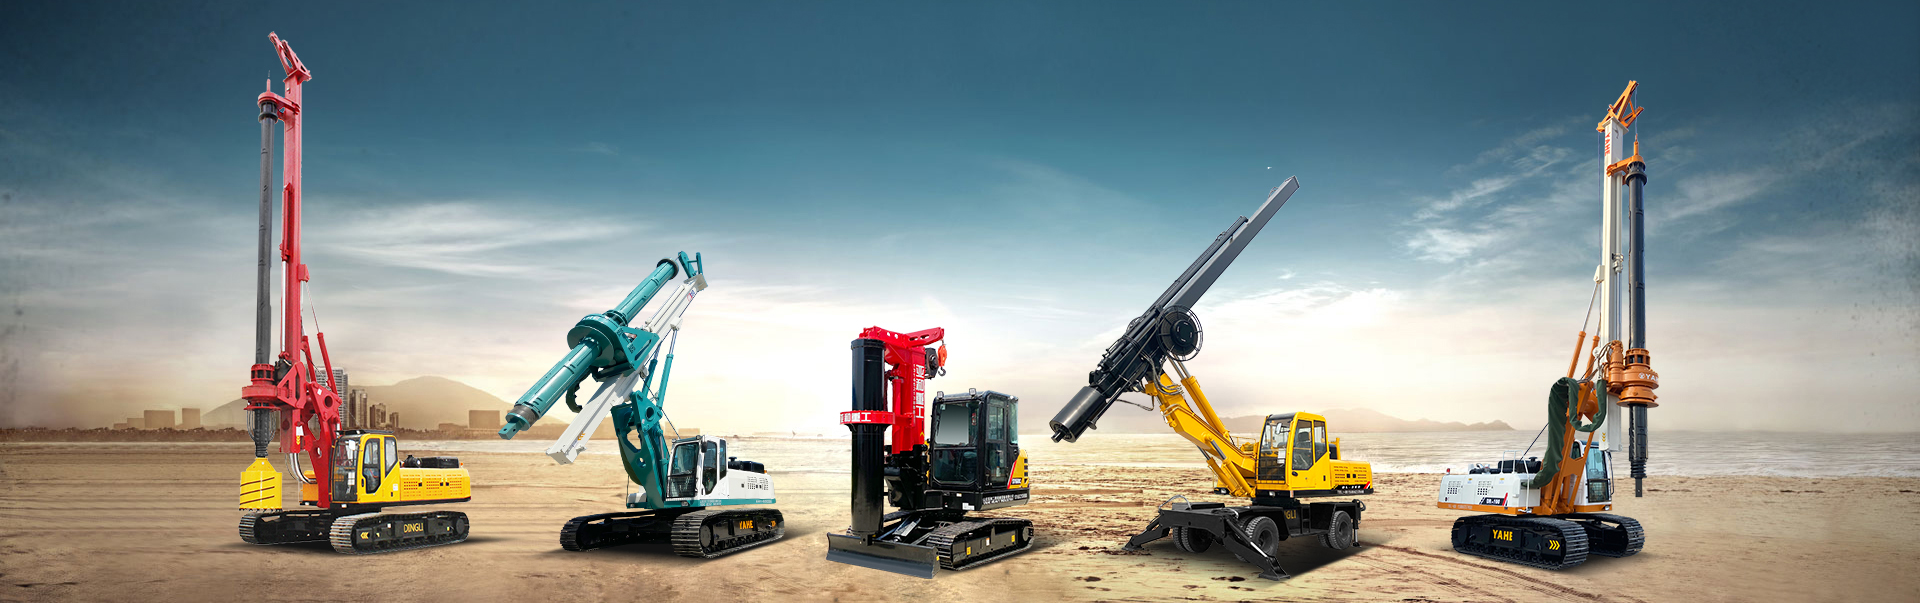 Excavator modified rotary drilling rig